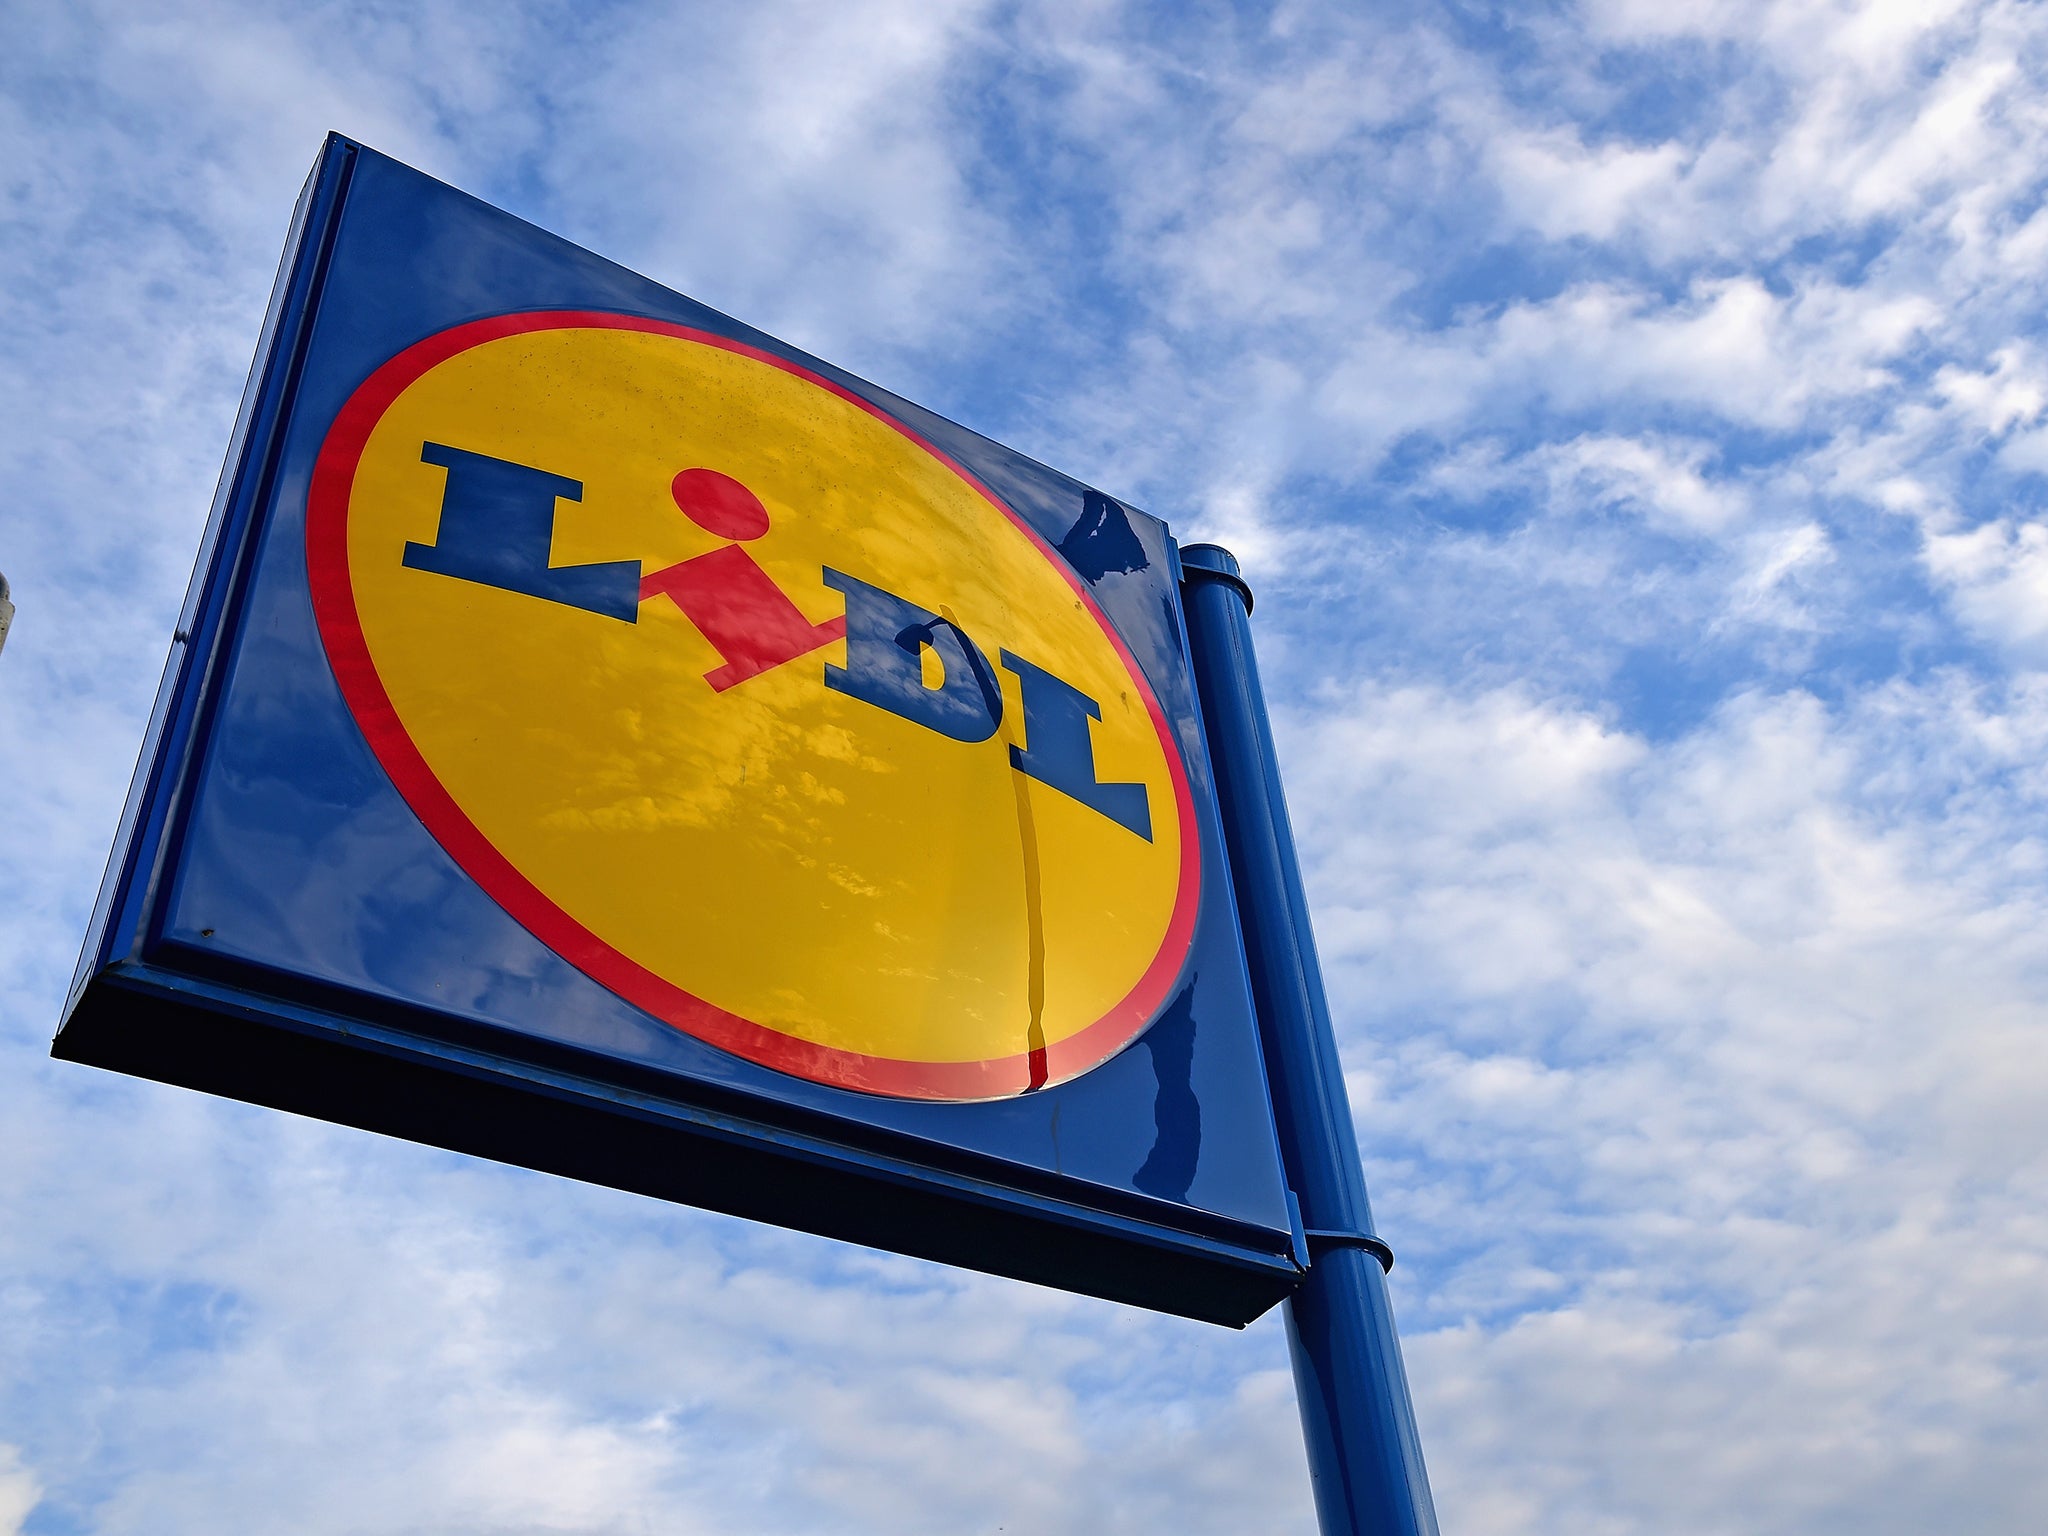 Lidl was praised for becoming the first UK supermarket to implement the living wage, but that praise quickly turned sour